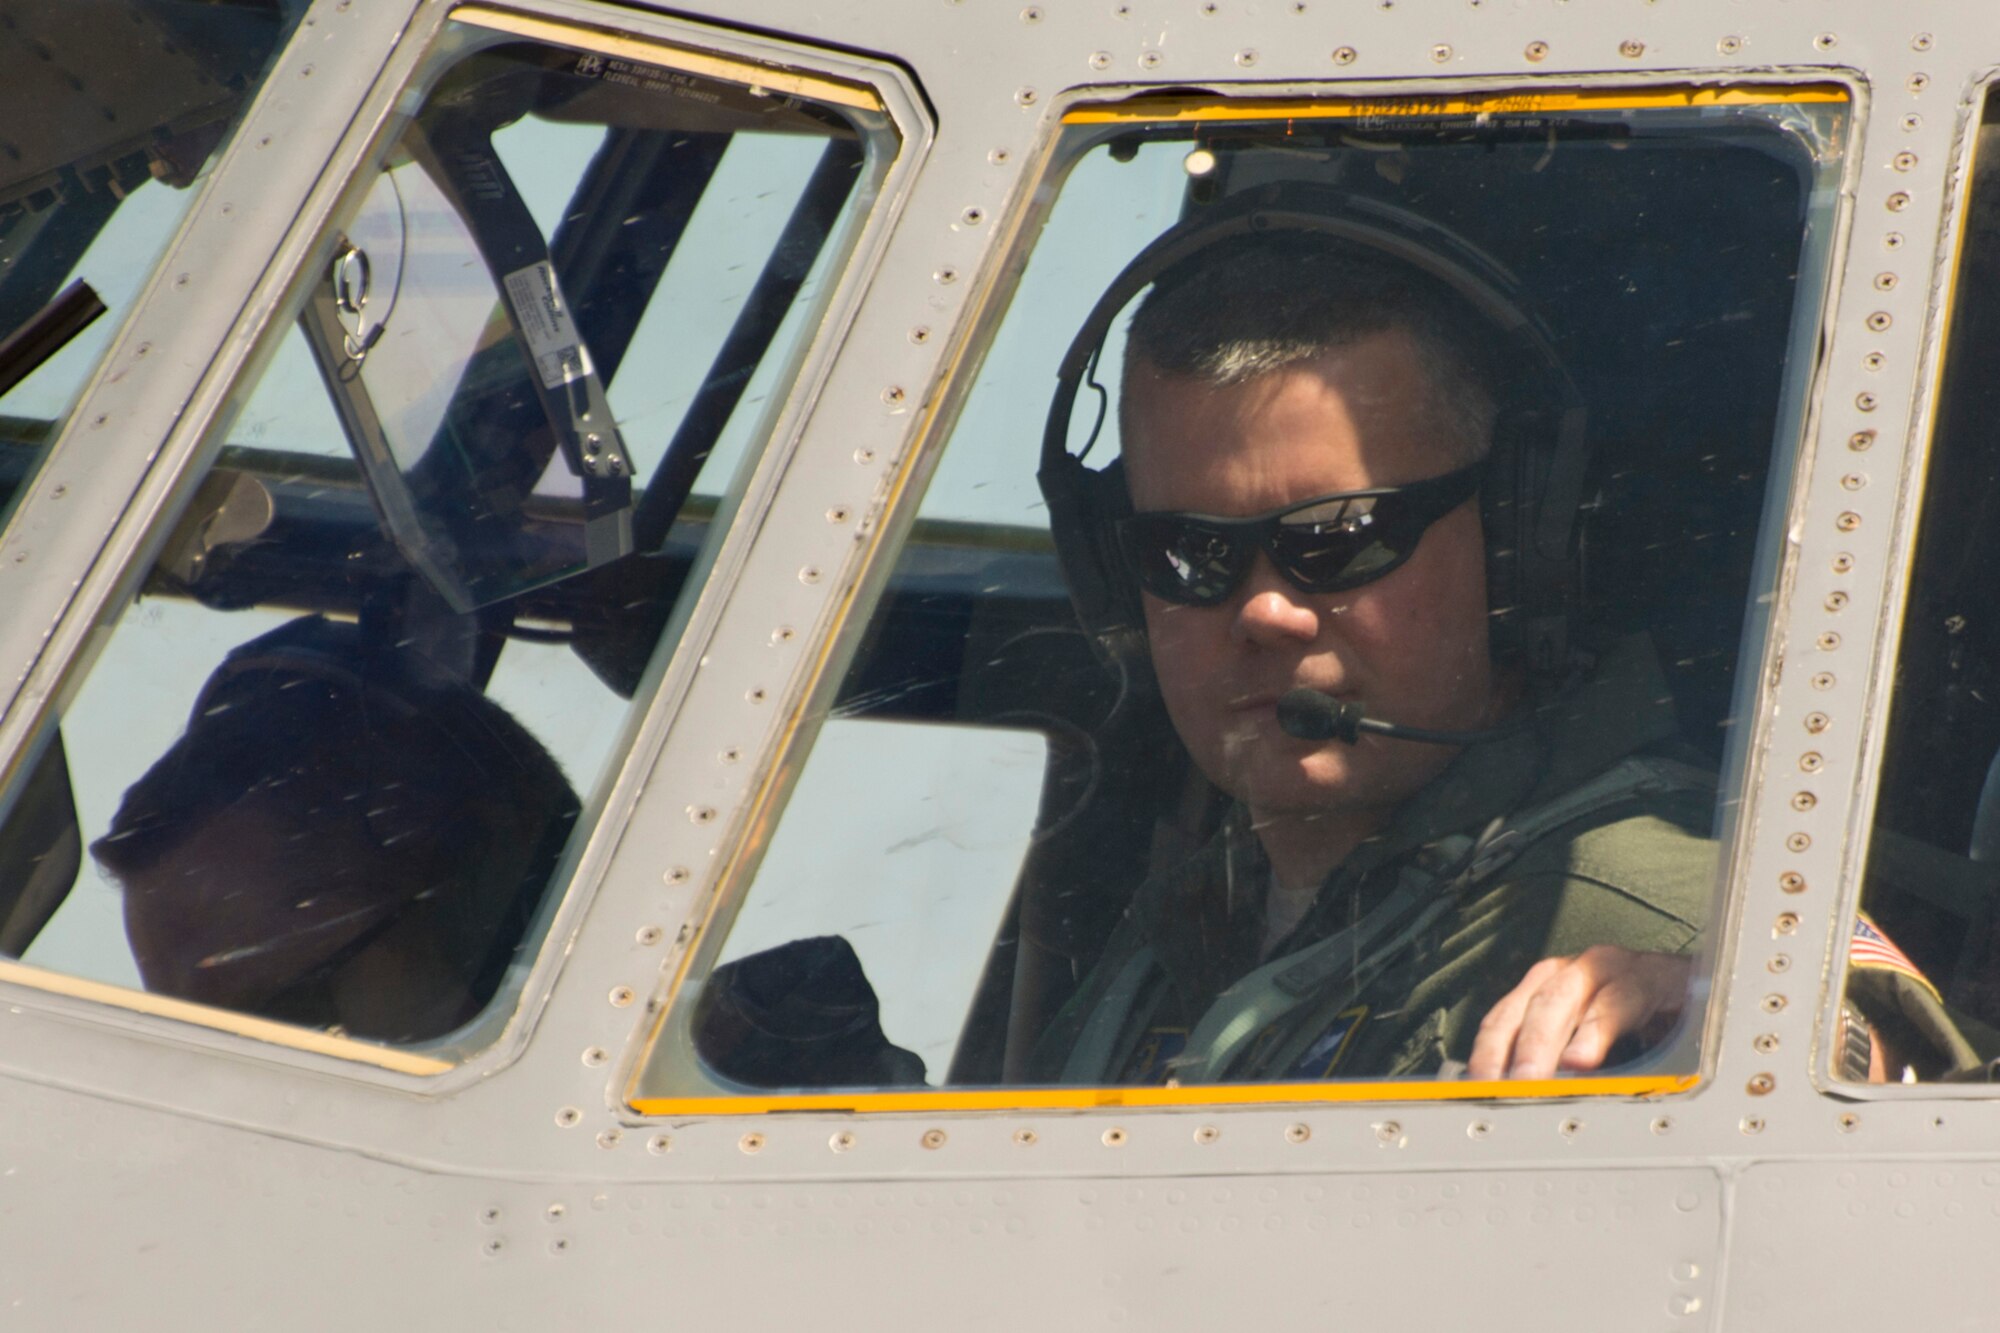 U.S. Air Force Reserve Maj. Chris Dickens, a pilot assigned to the 327th Airlift Squadron, performs preflight checks before taking off from Little Rock Air Force Base, Ark., May 13, 2016. This marks the first flight of a C-130J aircraft manned by an all Reserve aircrew since the 913th Airlift Group’s transition from the “H” to the “J” model. (U.S. Air Force photo by Master Sgt. Jeff Walston/Released)